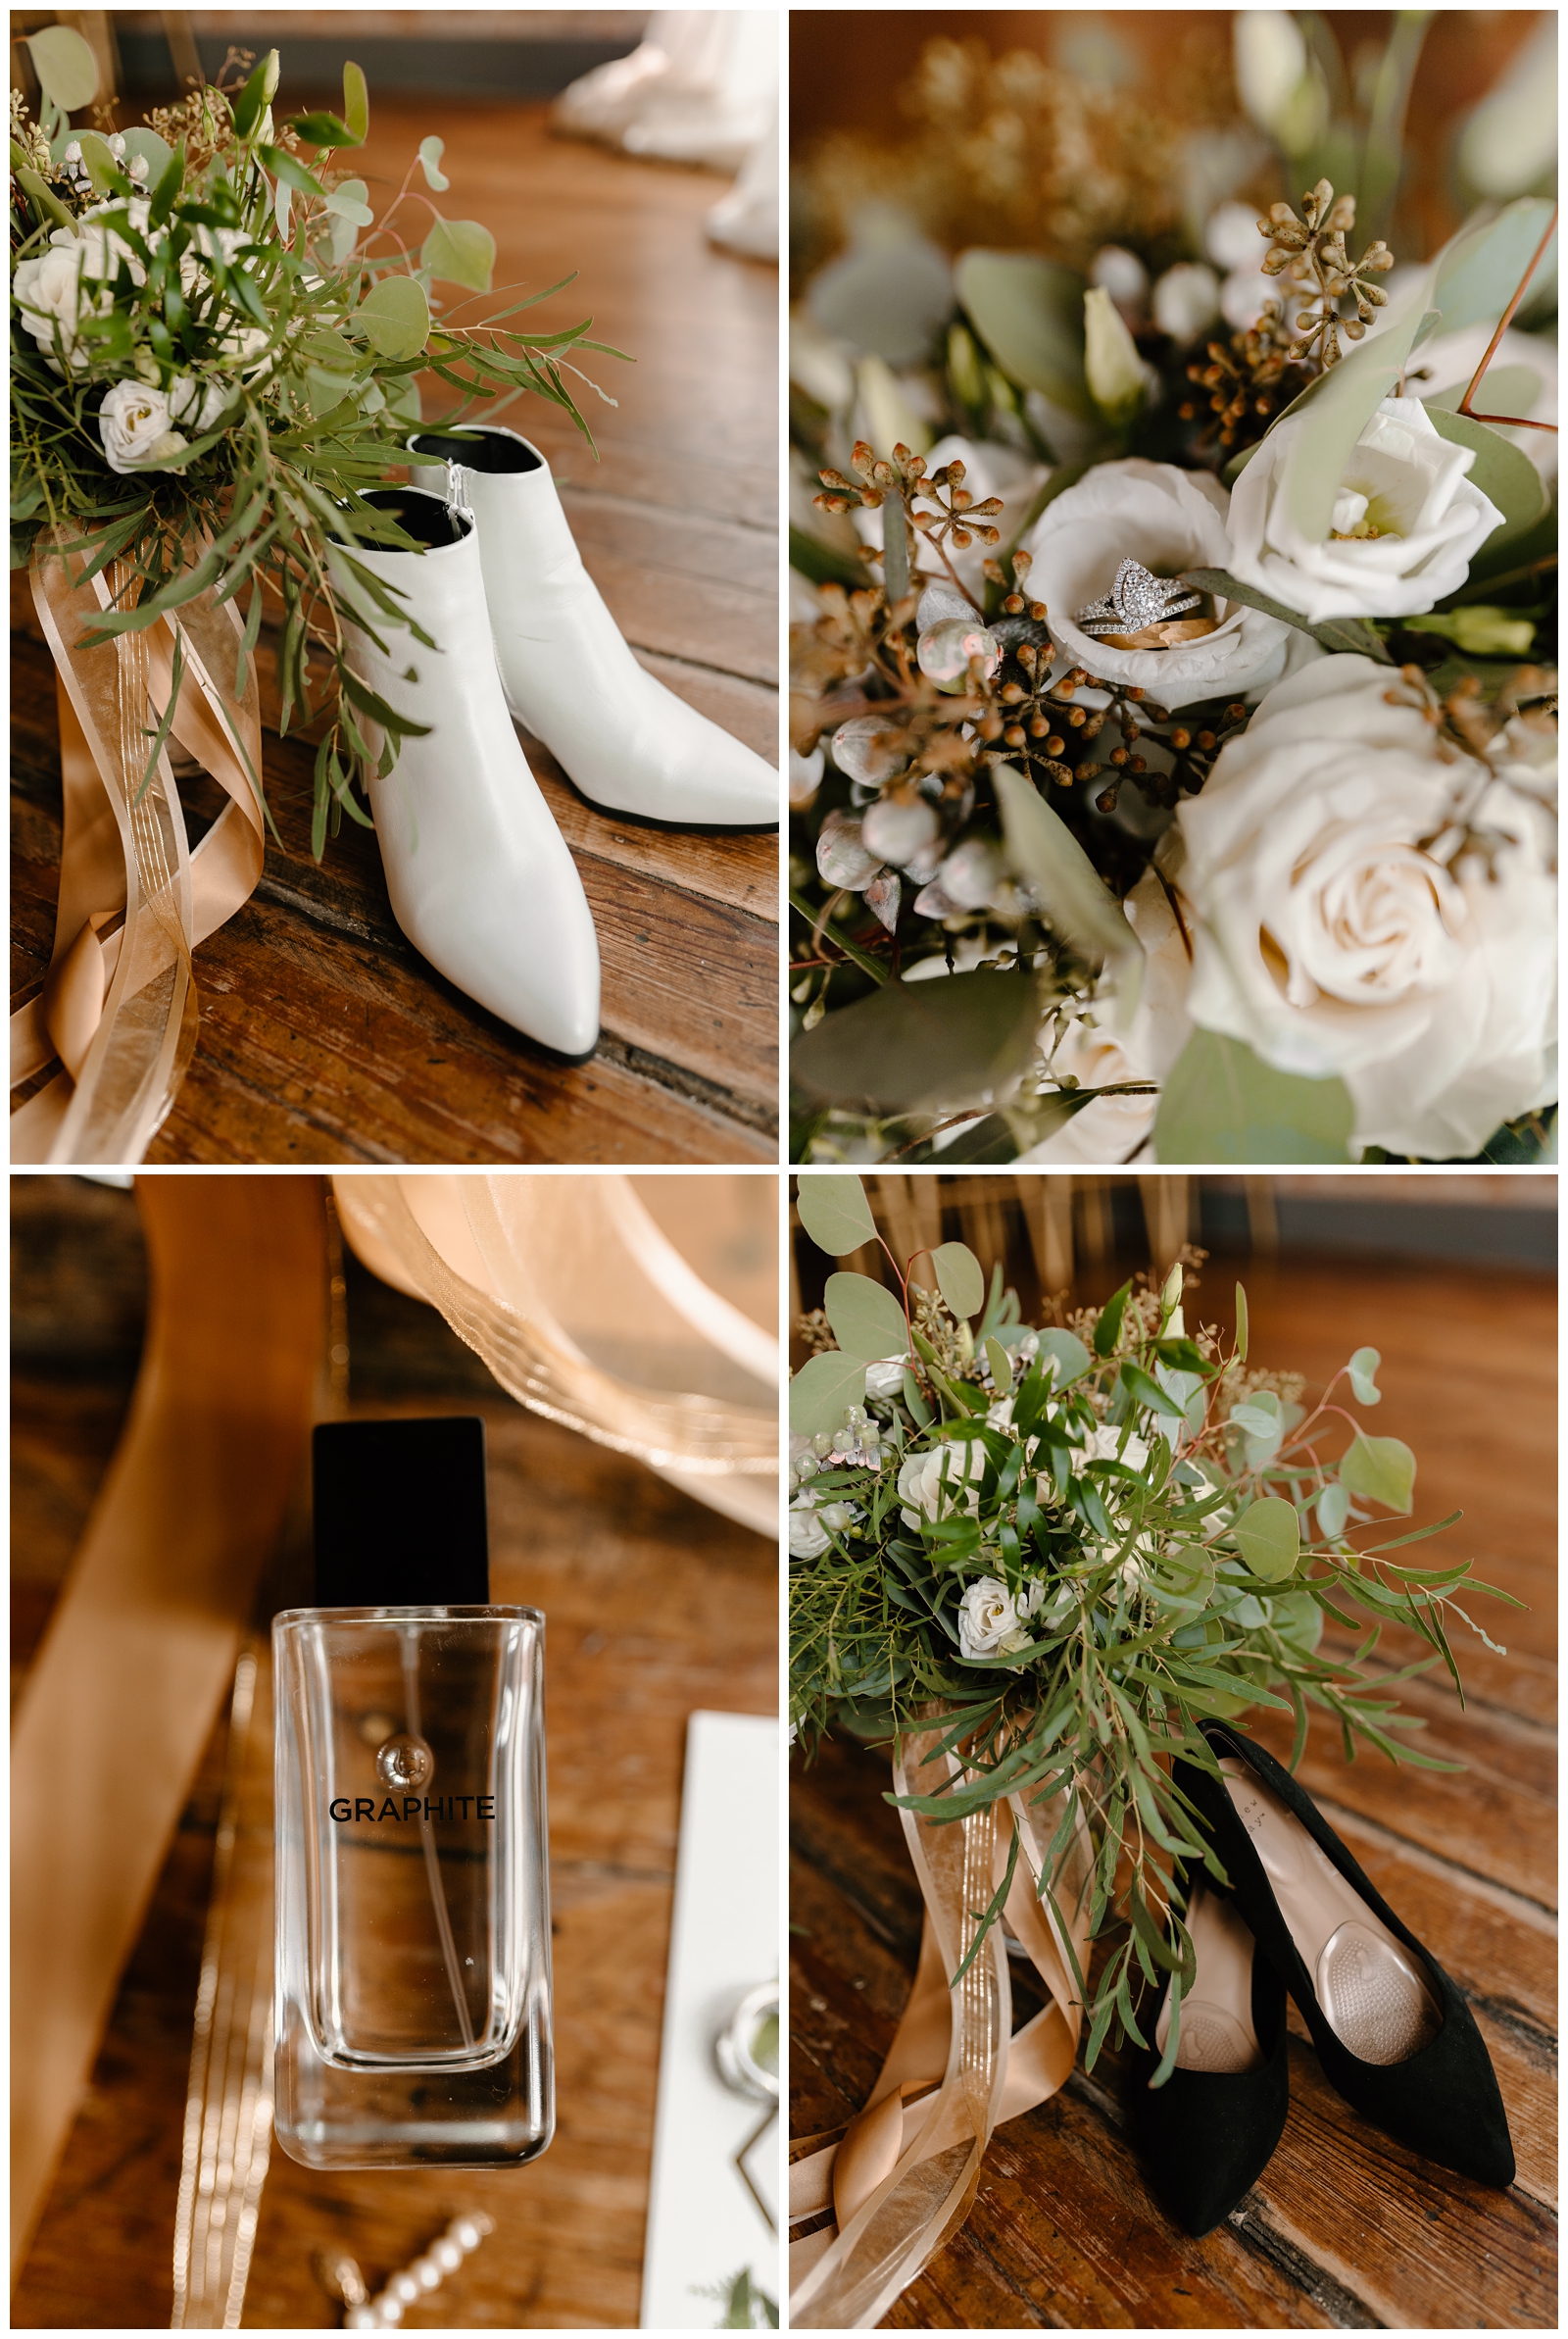 Both bride's shoes with bouquets, cologne, and rings